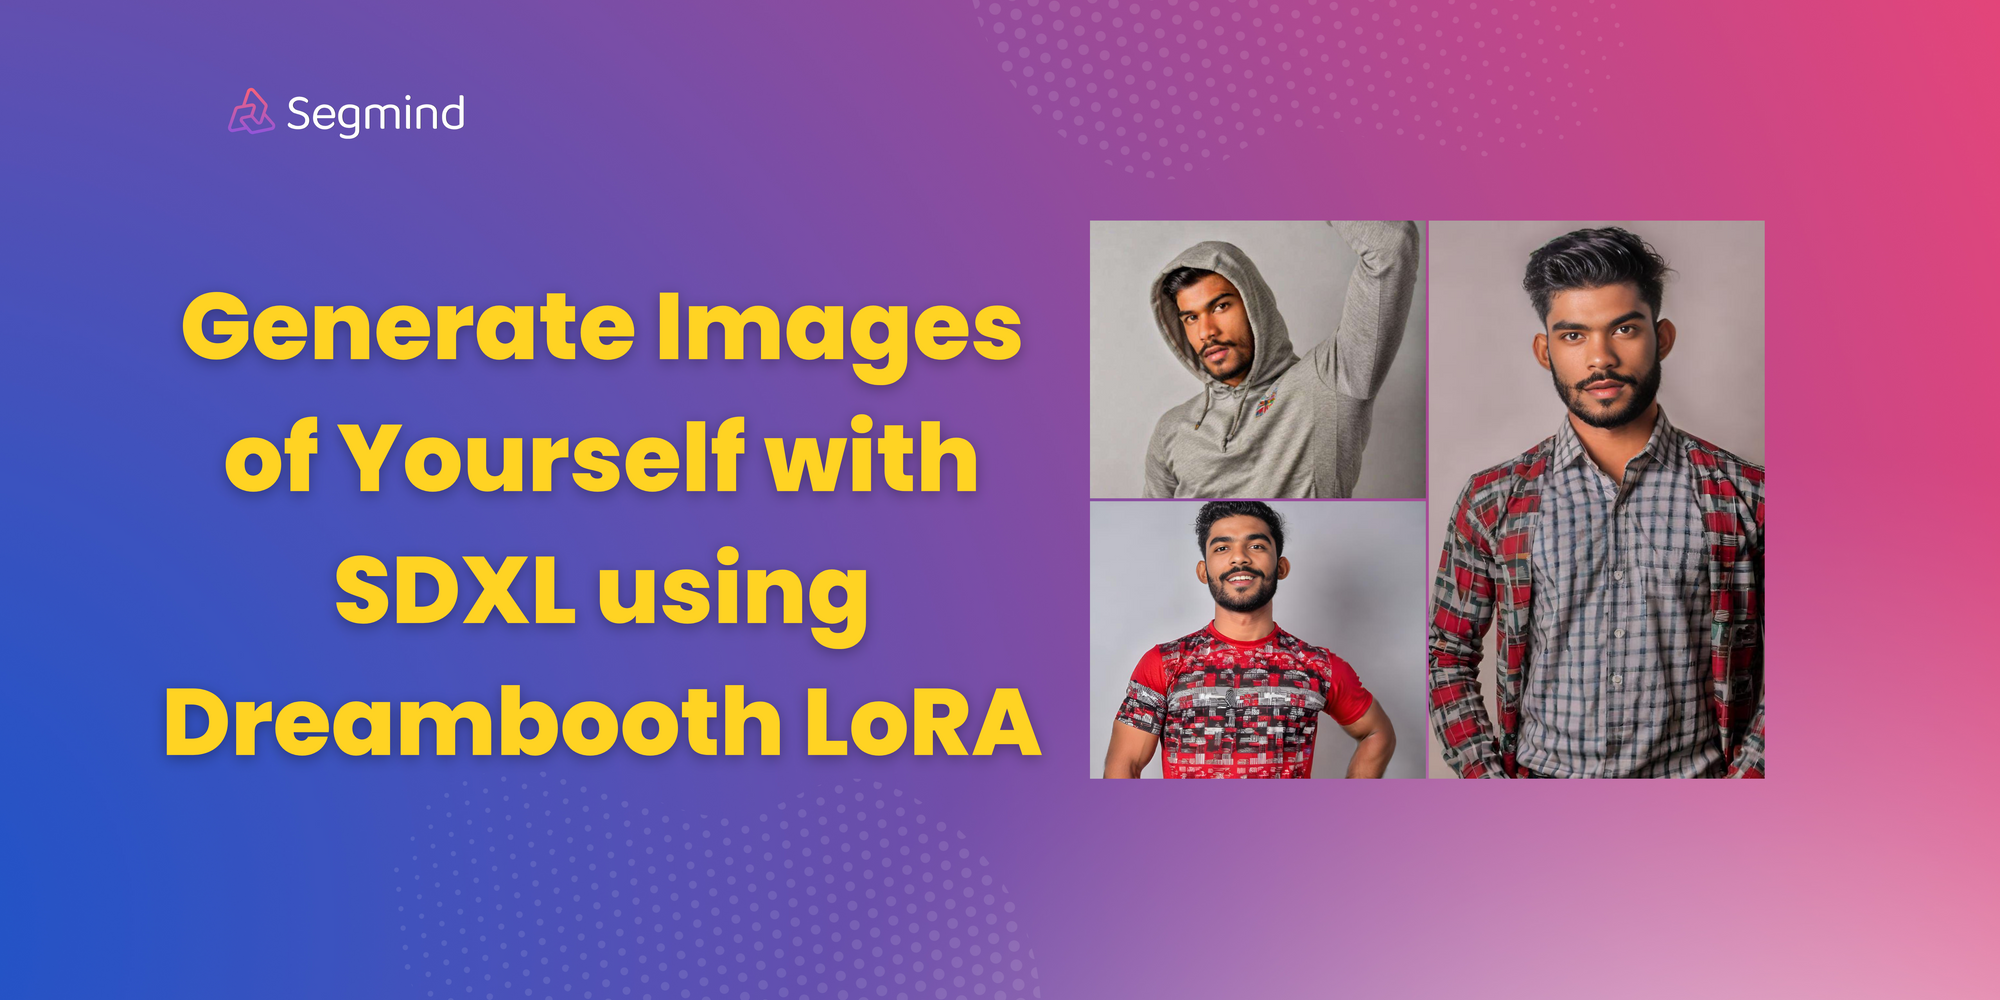 Dreambooth LoRA: How to Generate Images of Yourself with SDXL